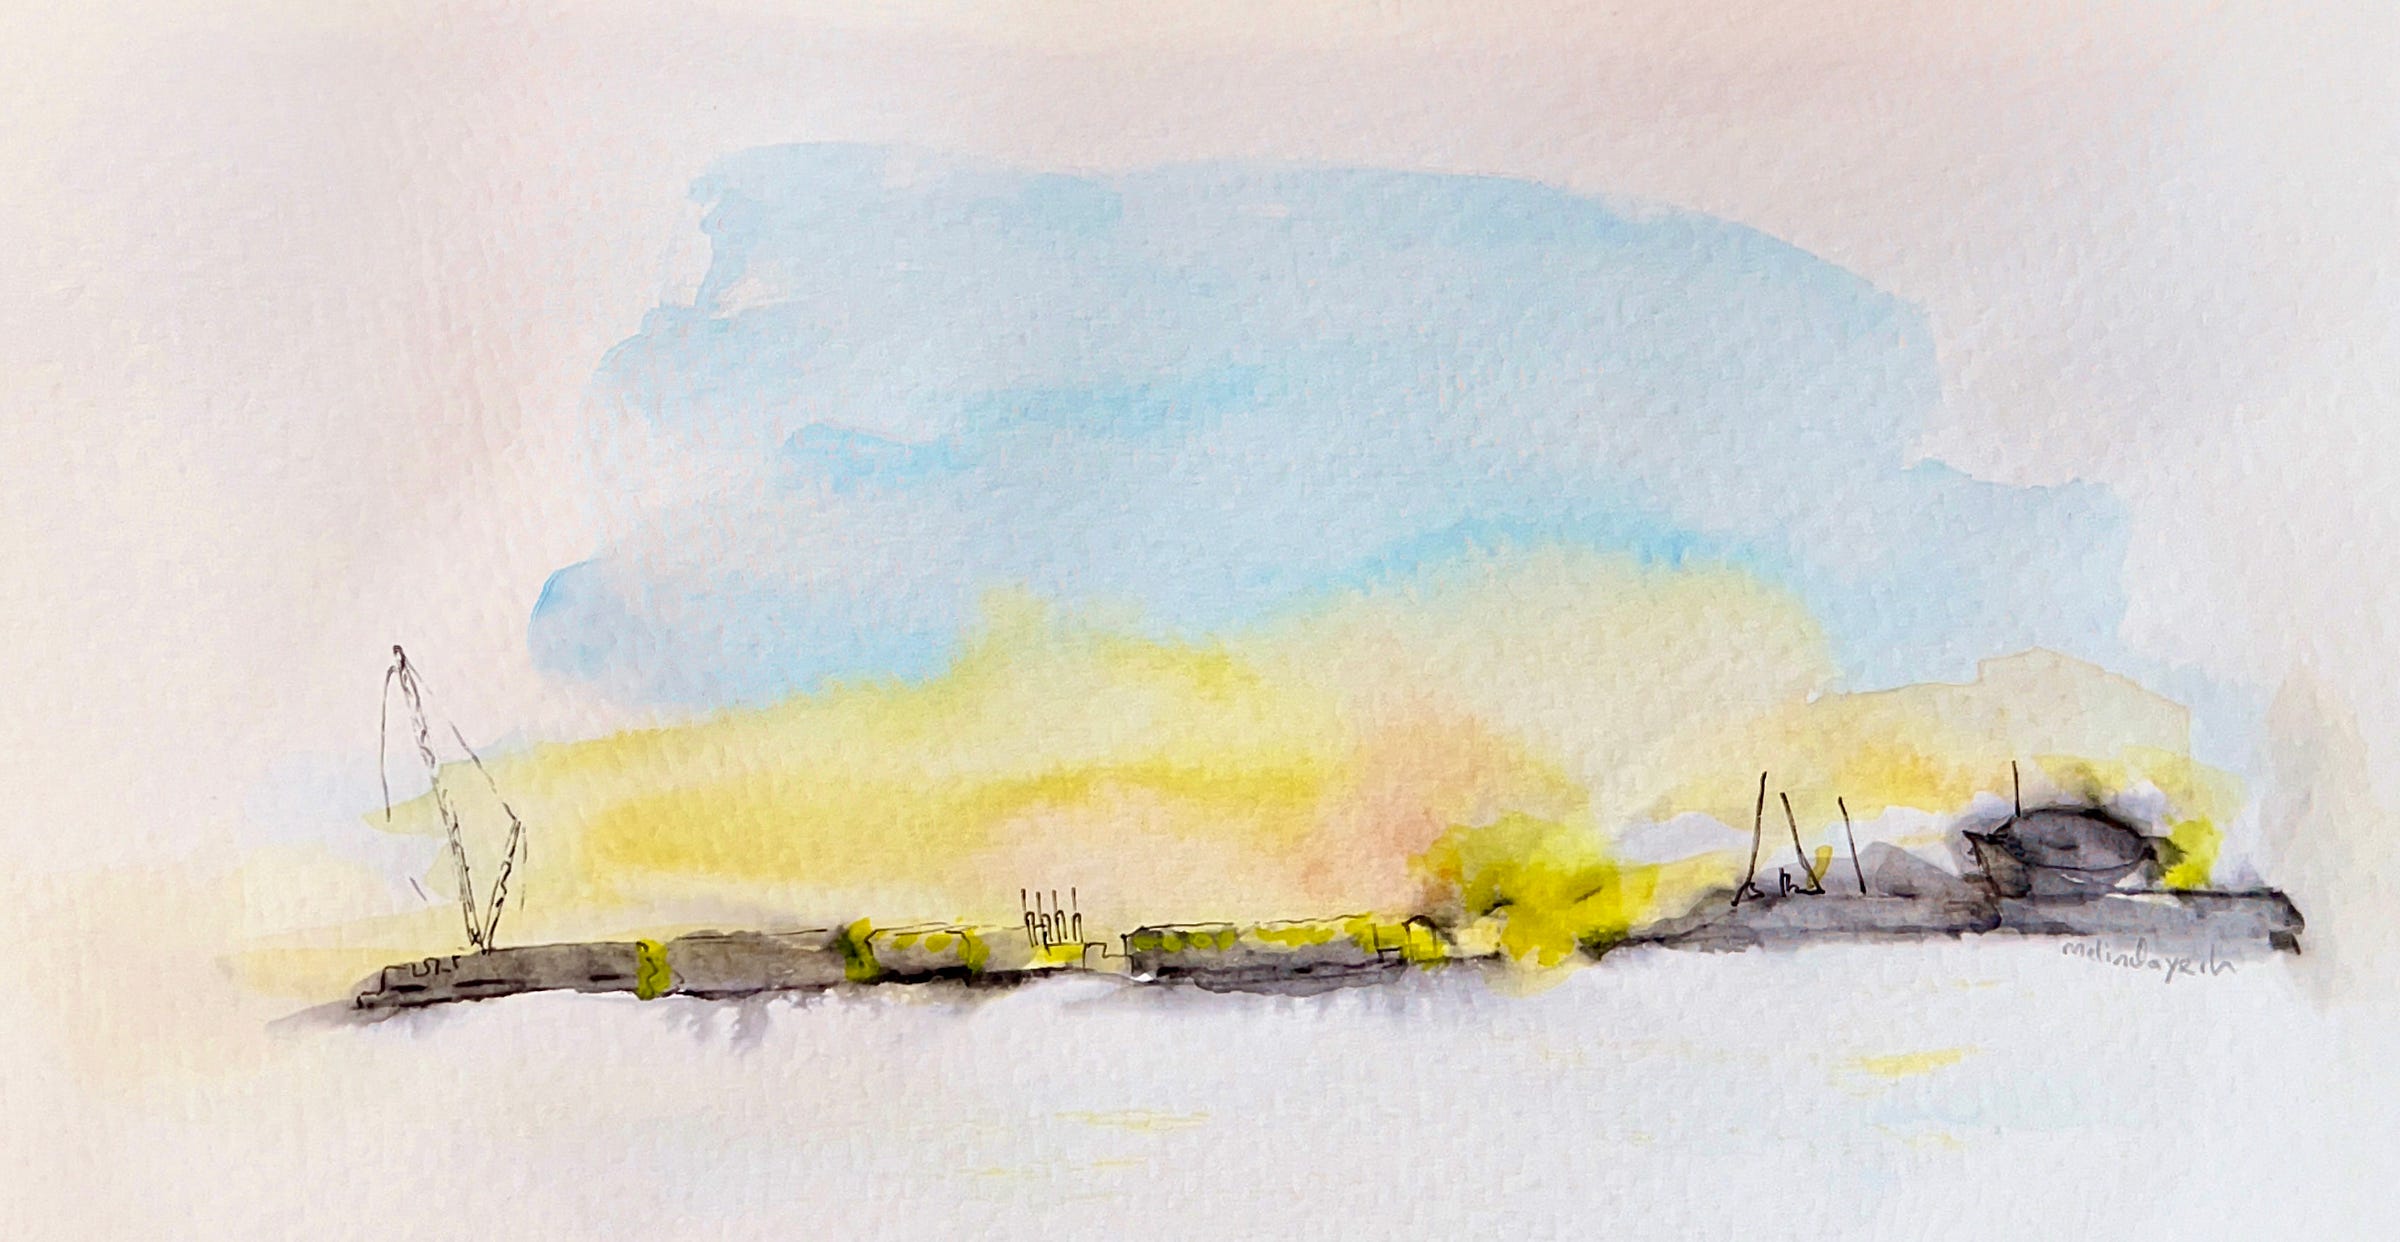 image: ink and watercolour painting of Matosinhos Beach at dusk